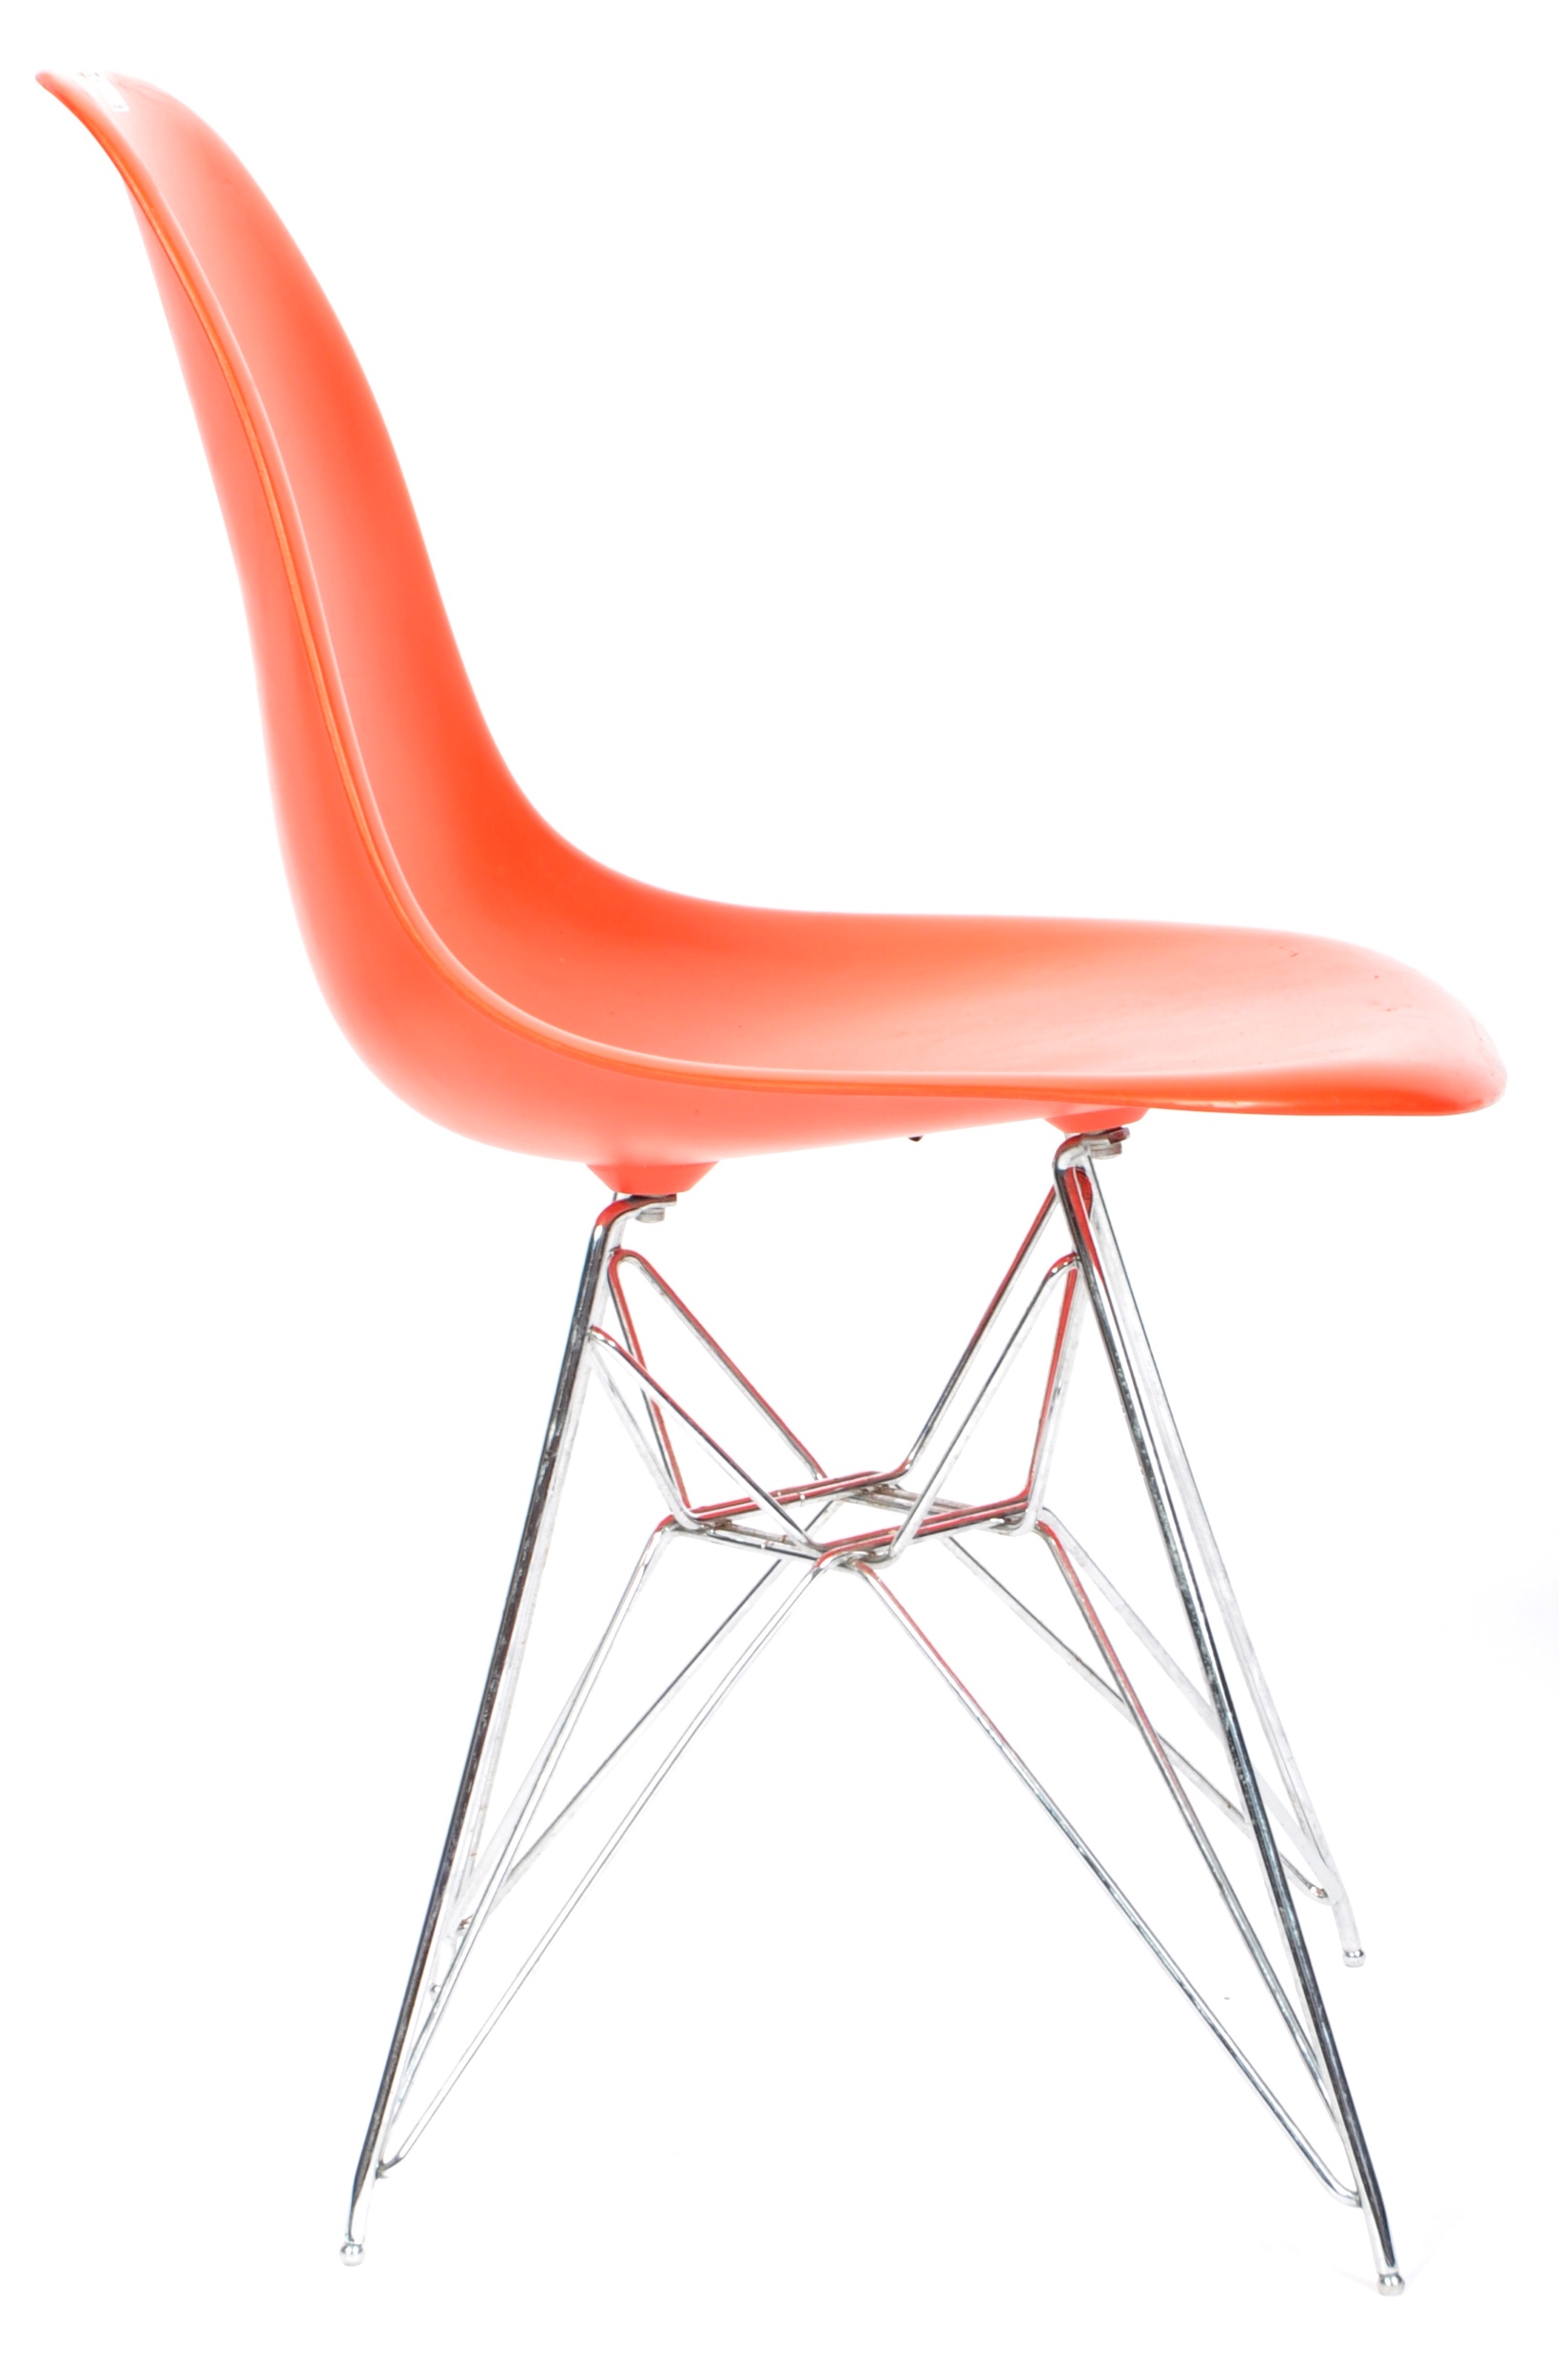 CHARLES & RAY EAMES FOR VITRA - DSR EAMES PLASTIC CHAIR - Image 8 of 10